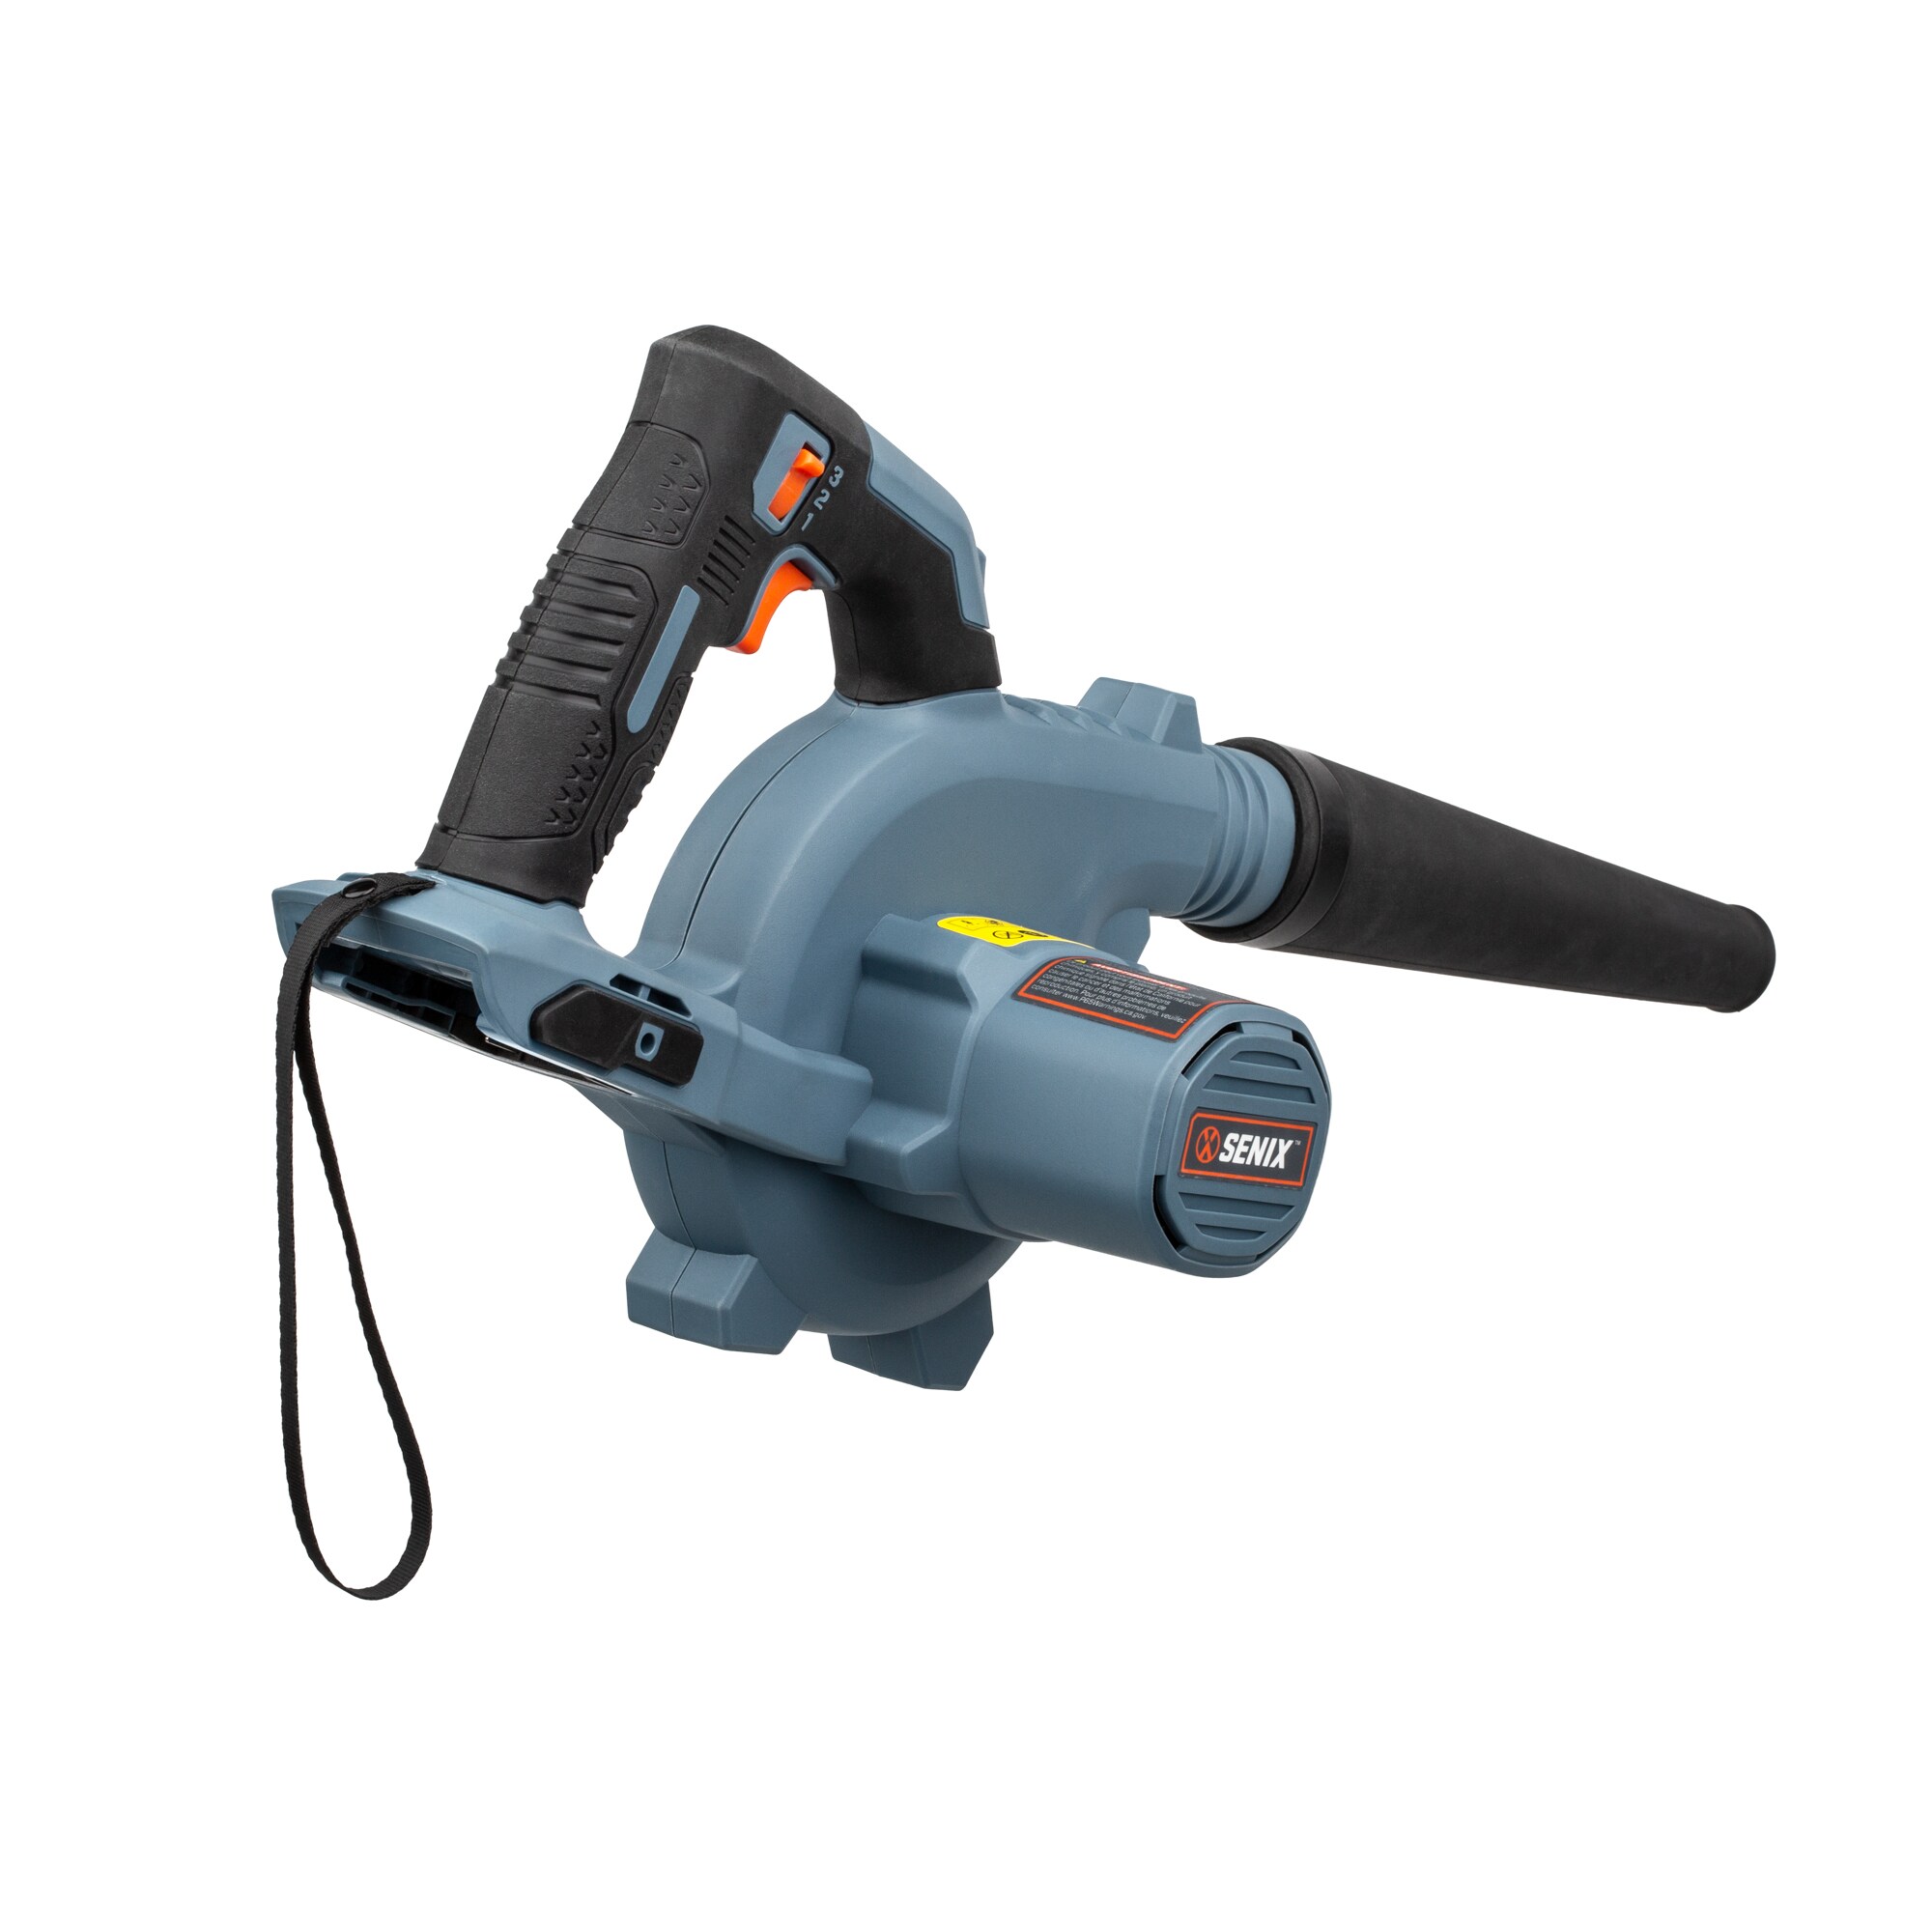 Senix 20 Volt MAX* Cordless Jobsite Blower (Battery and Charger Included), Blx2-m, Blue